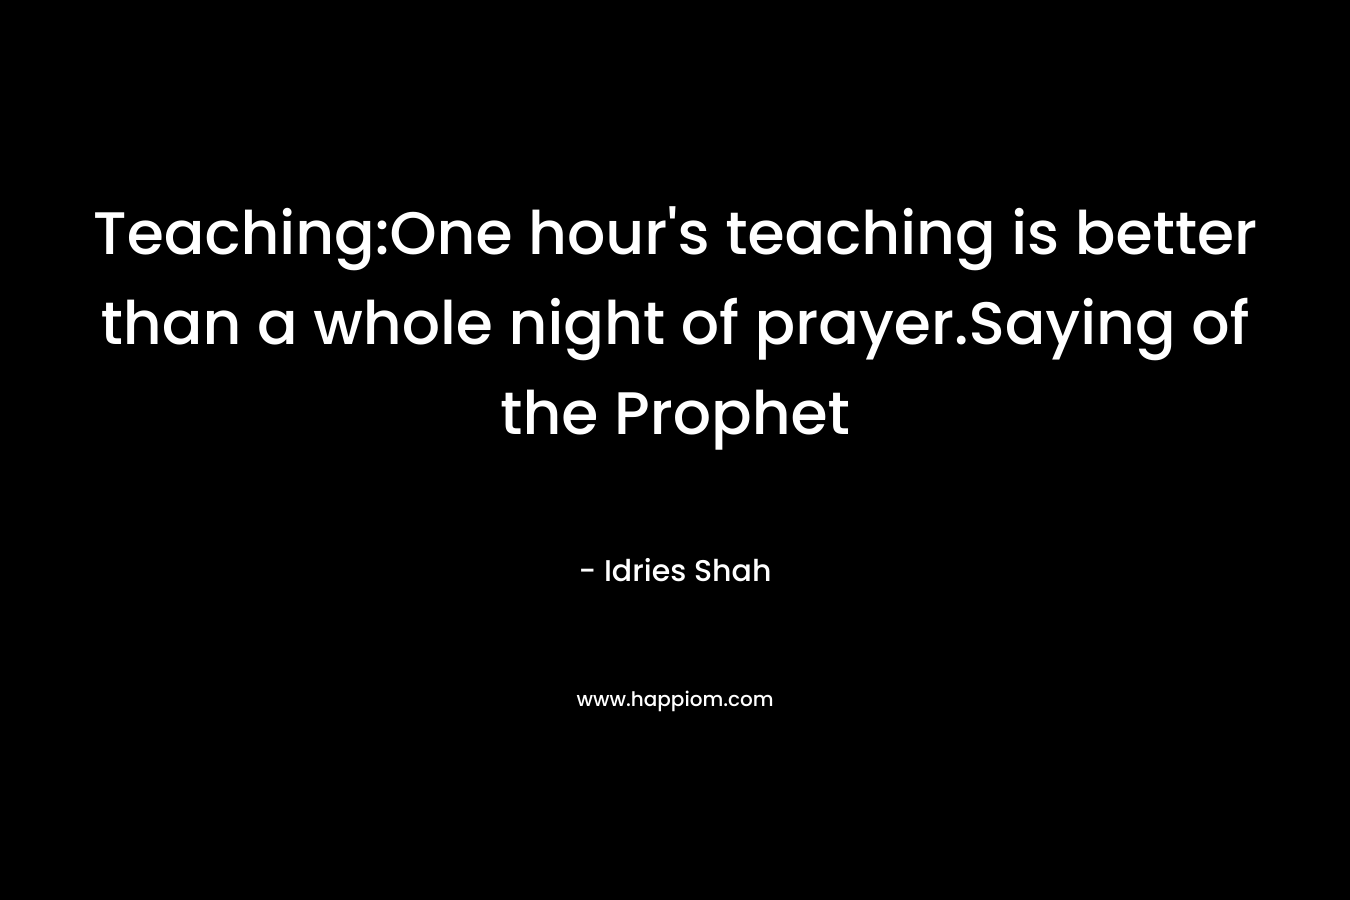 Teaching:One hour's teaching is better than a whole night of prayer.Saying of the Prophet